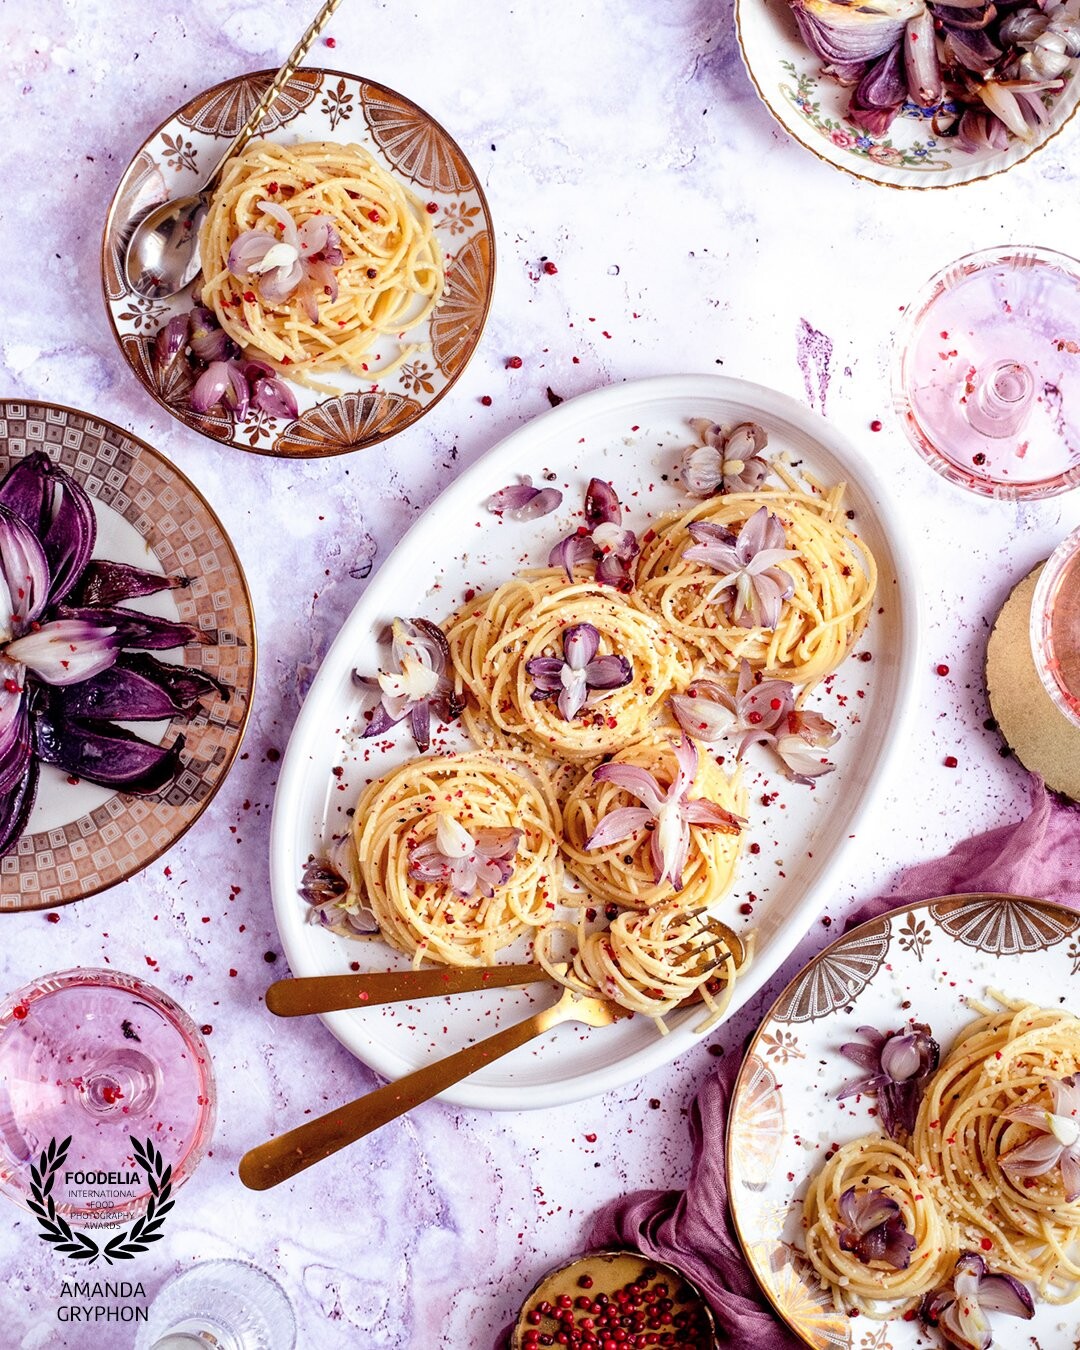 Inspired by cherry blossom season, this pink peppercorn cacio e pepe is blooming with tiny edible flowers carved from red pearl onions in springy shades of pink and purple.